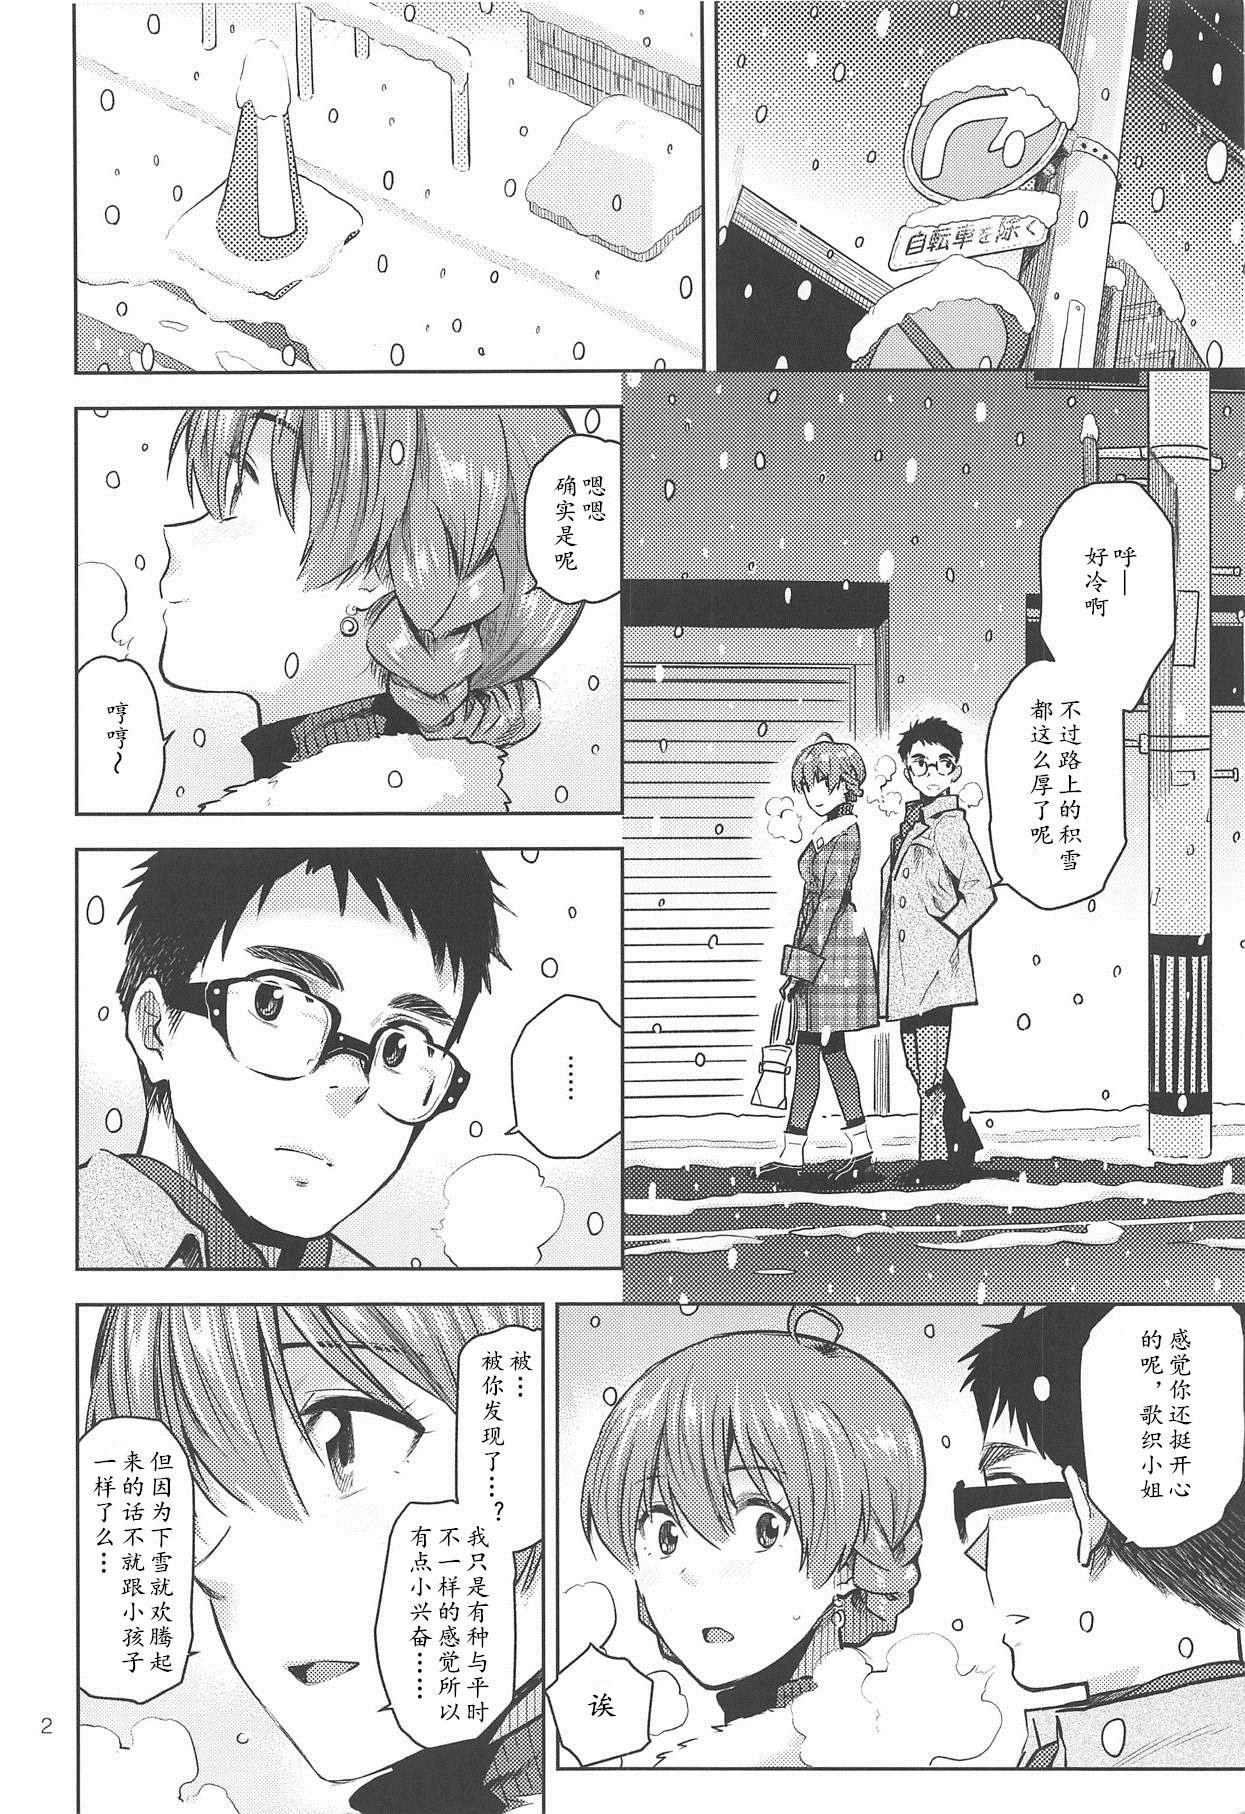 Blows Virgin Snow | 圣雪 - The idolmaster Busty - Page 4